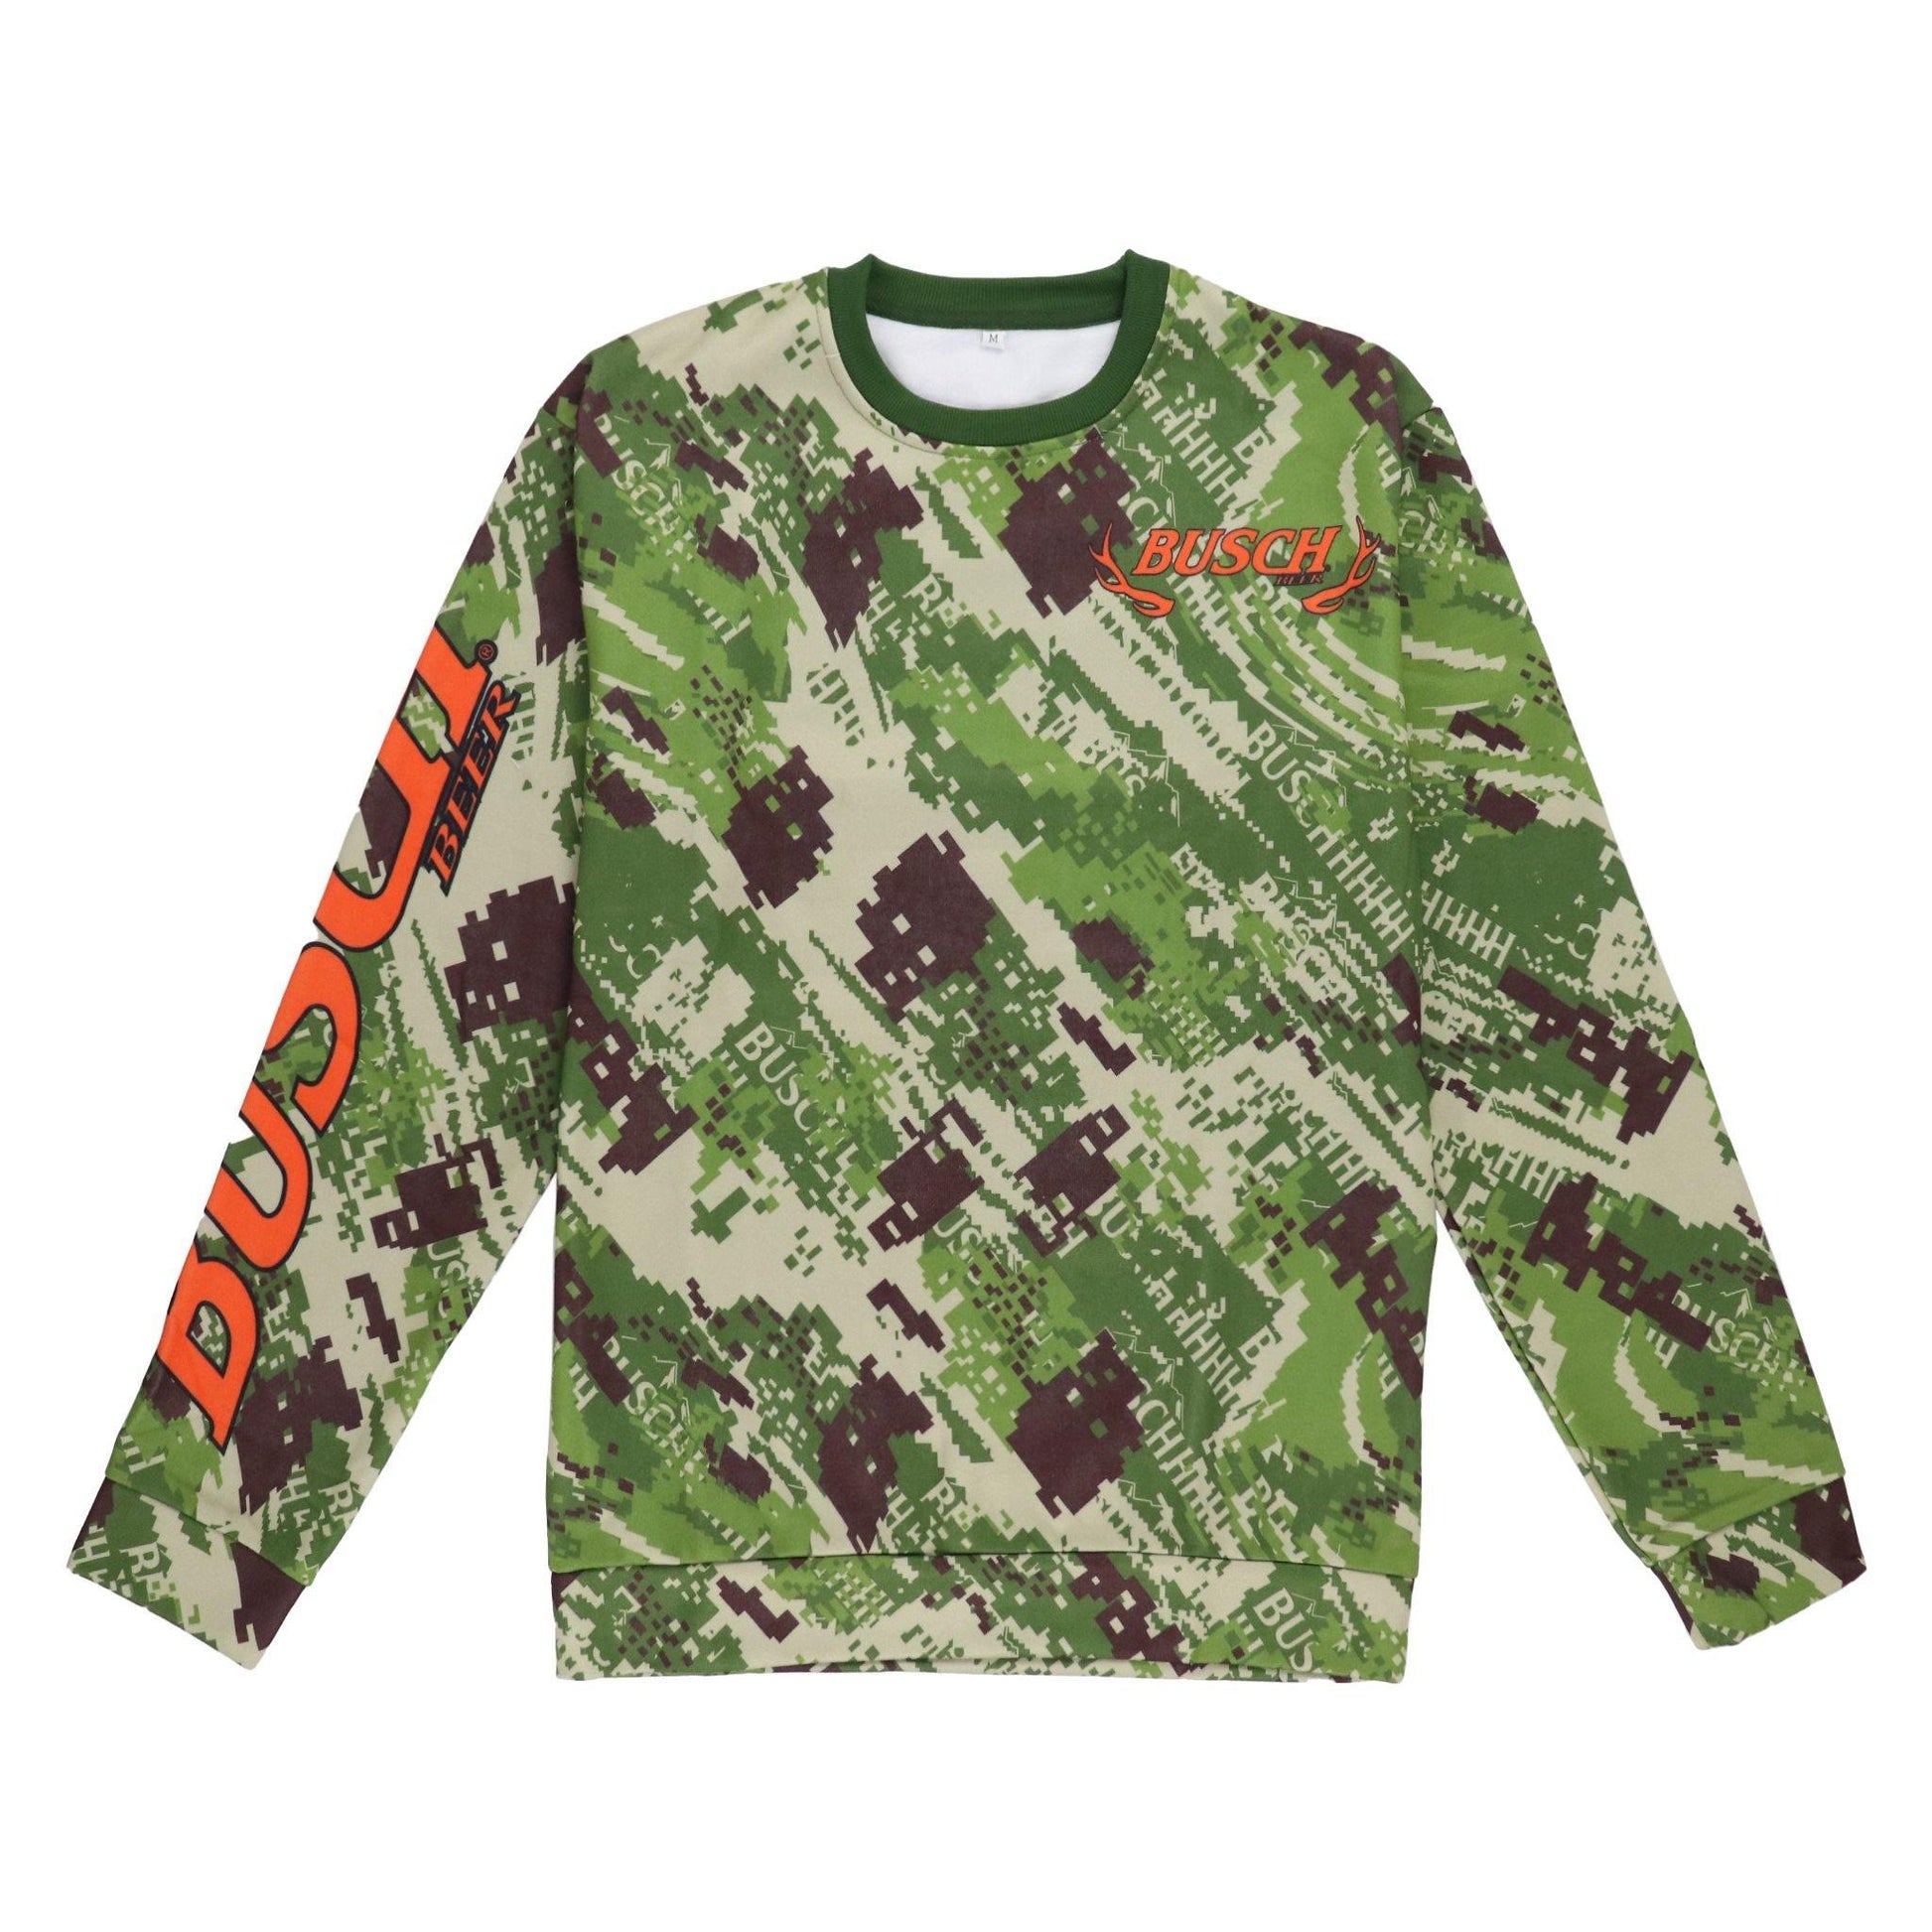 green busch camo sweatshirt with orange "busch" on right sleeve and upper chest area